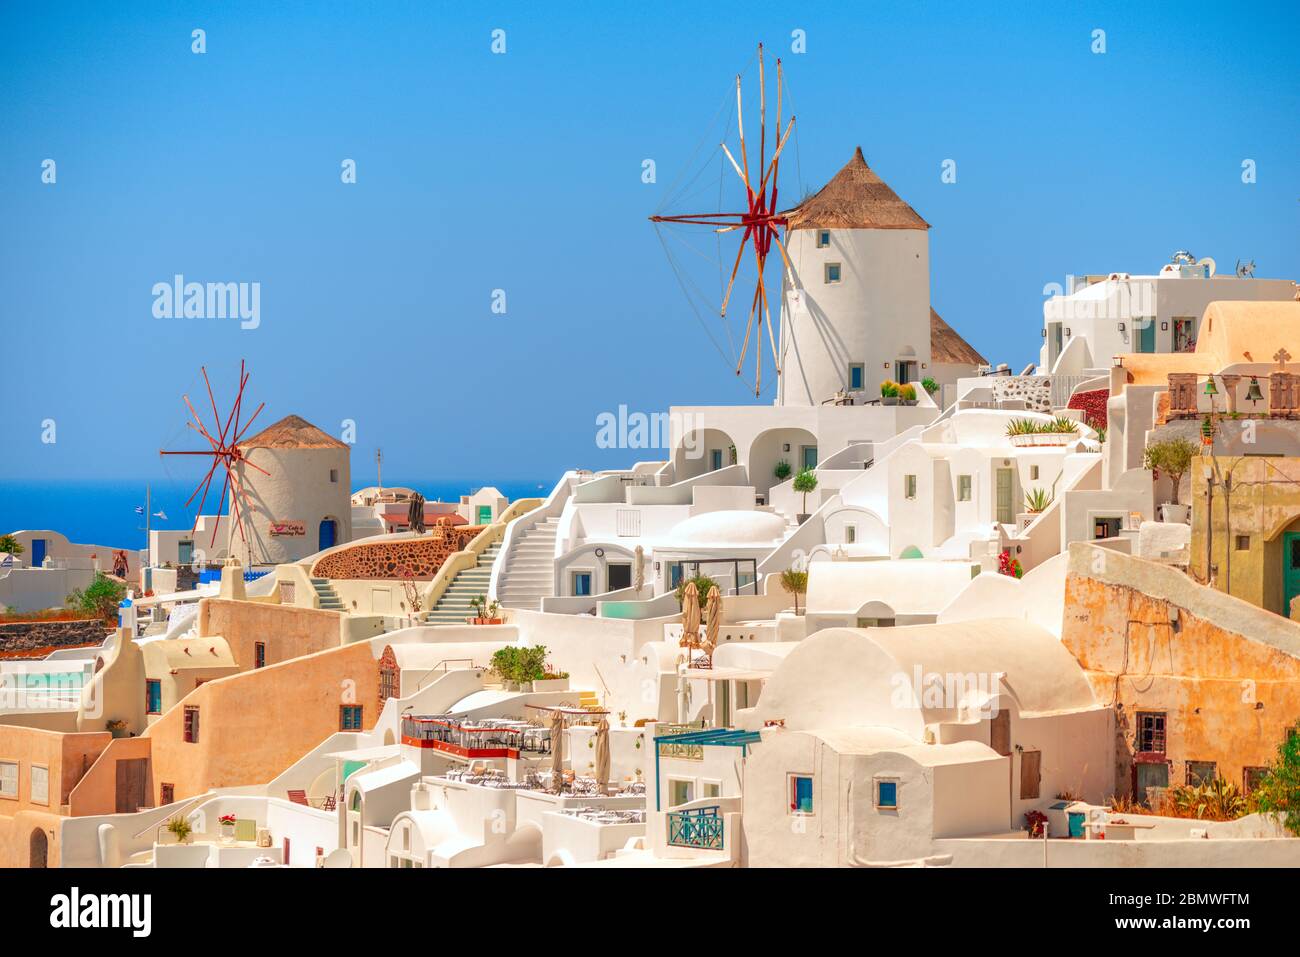 These windmills are an iconic symbol of Santorini, a greek island and is to be found in the picturesque village of Oia. Stock Photo